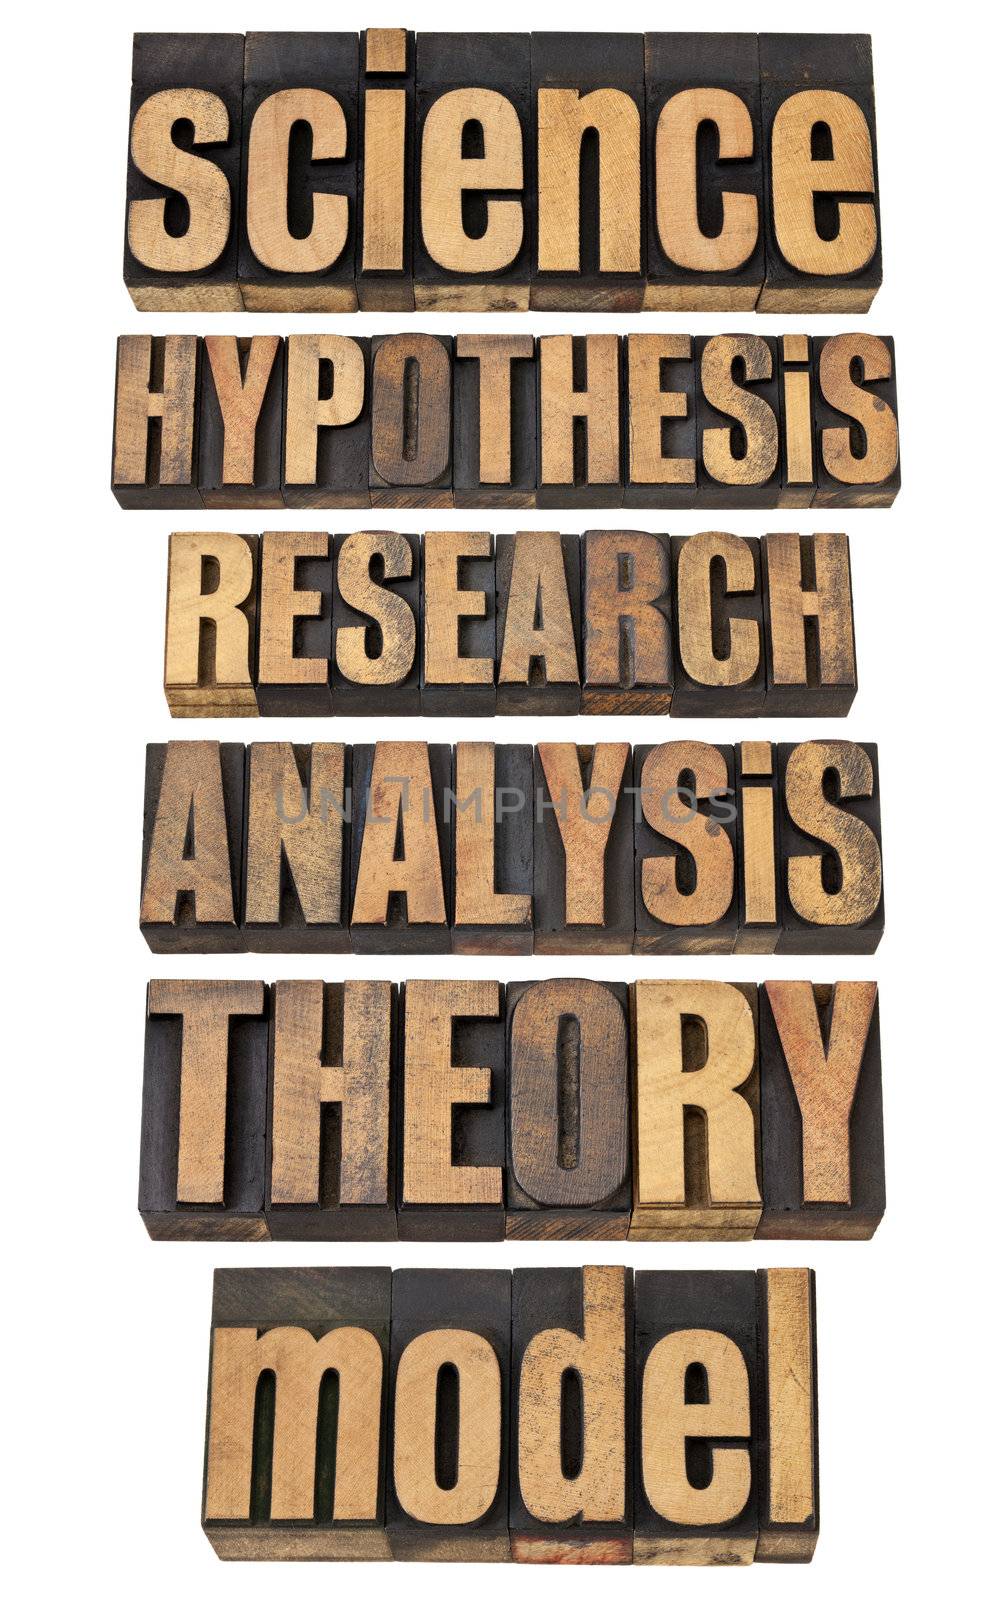 science related terms - a collage of isolated words in vintage letterpress wood type - hypothesis, research, analysis, theory, model